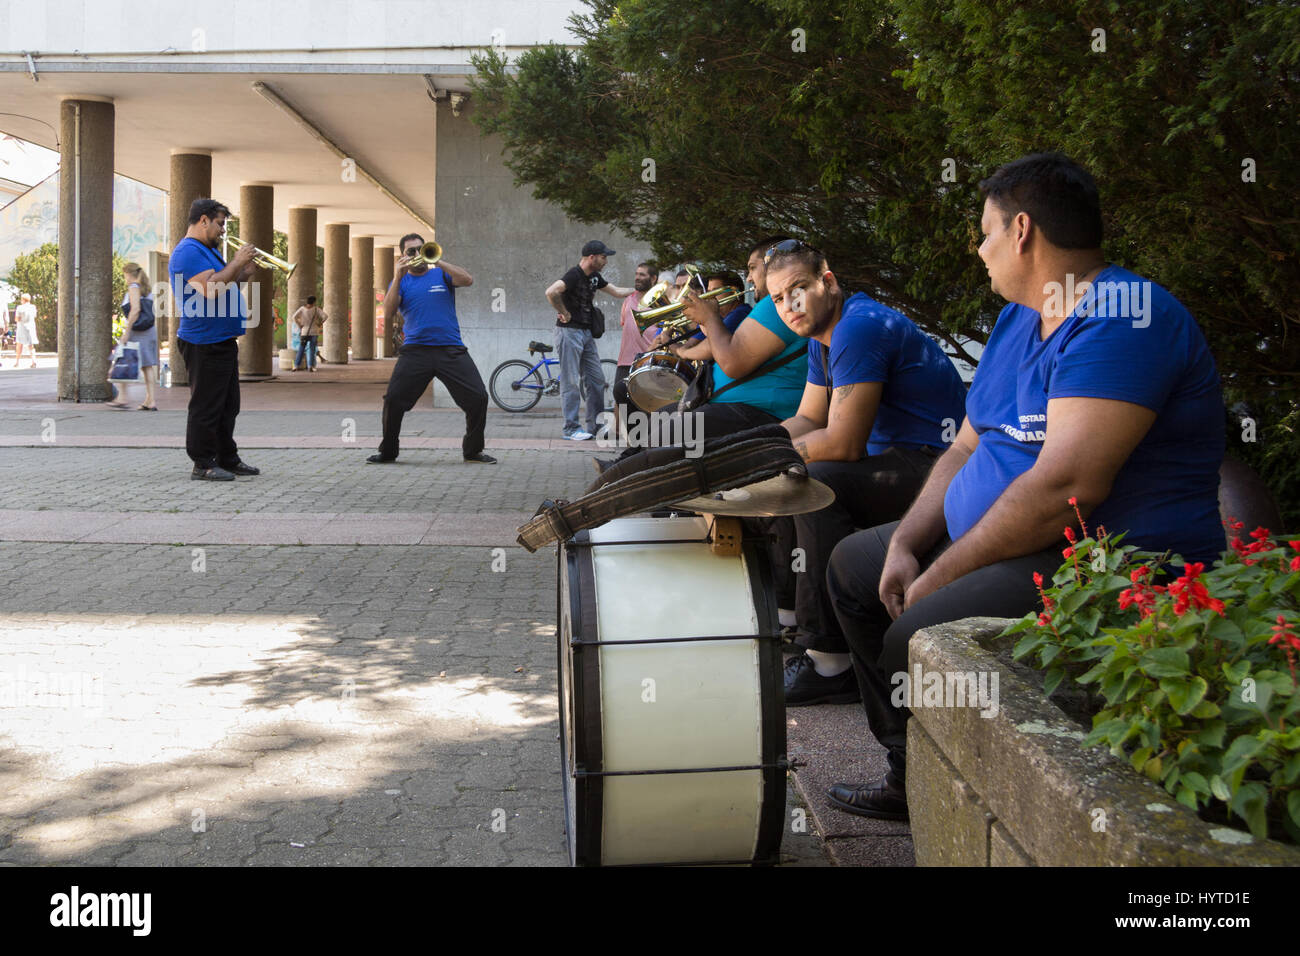 PANCEVO, SERBIA - AUGUST 1, 2015:Roma music band rehearsing before a wedding performance   Picture of a group of roma   playing music and singing to p Stock Photo